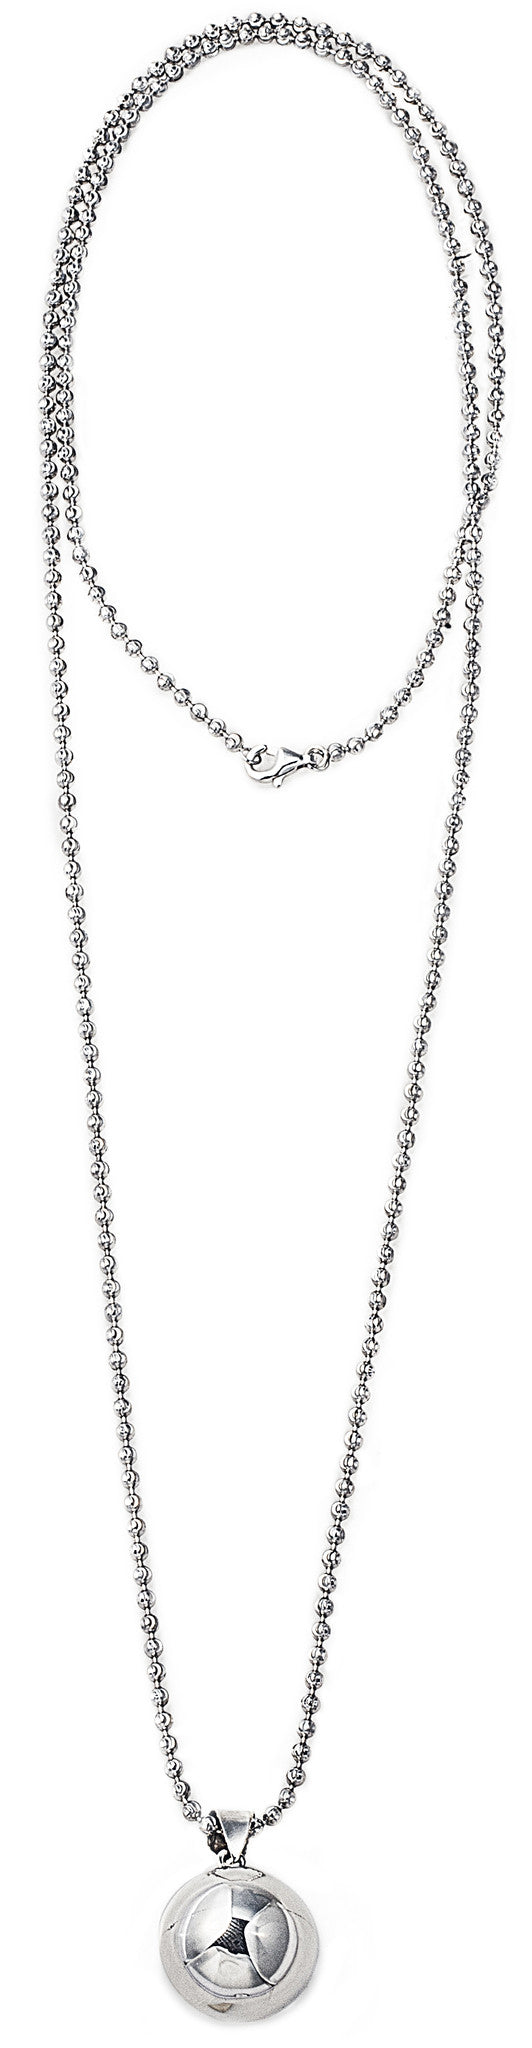 Look at my villa necklace, tiffany, silver, necklace, chain, bling, diamond, silver ball,